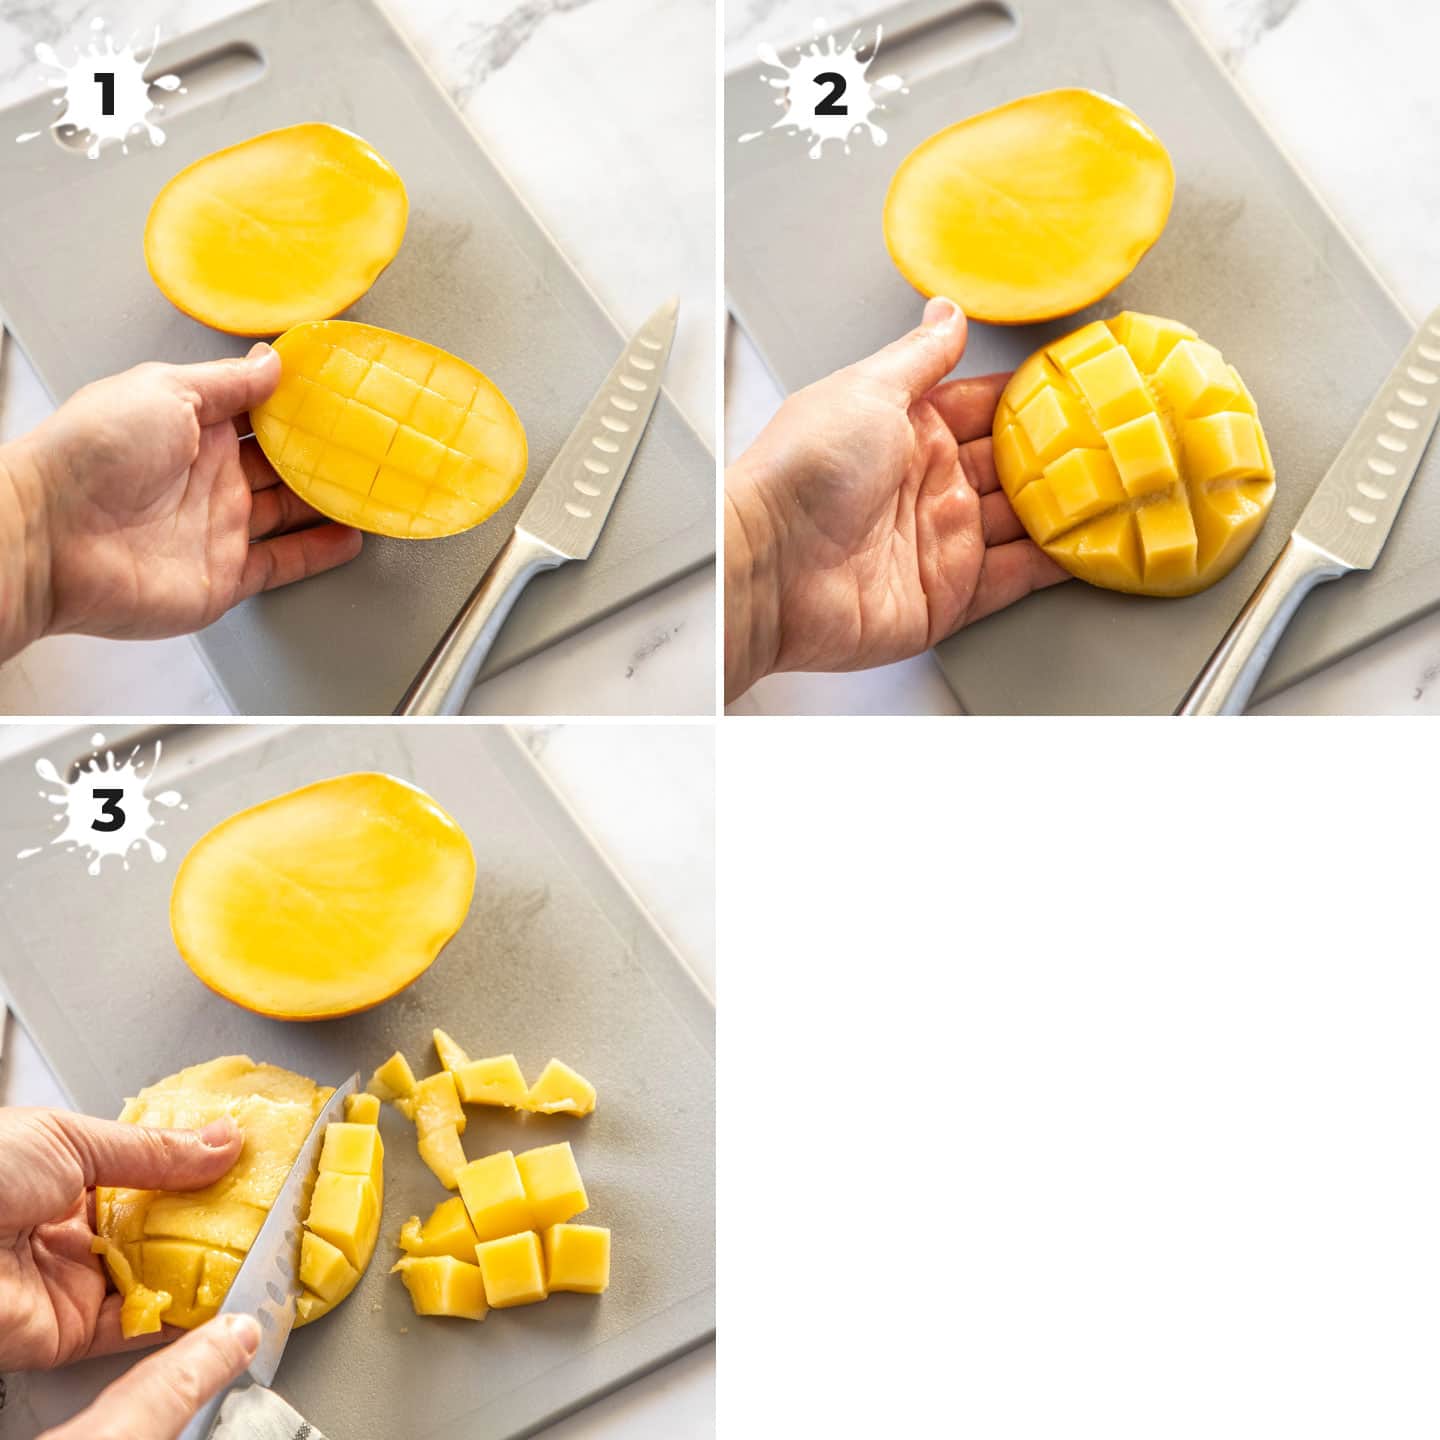 3 images showing how to cut cubes of mango from it's skin.